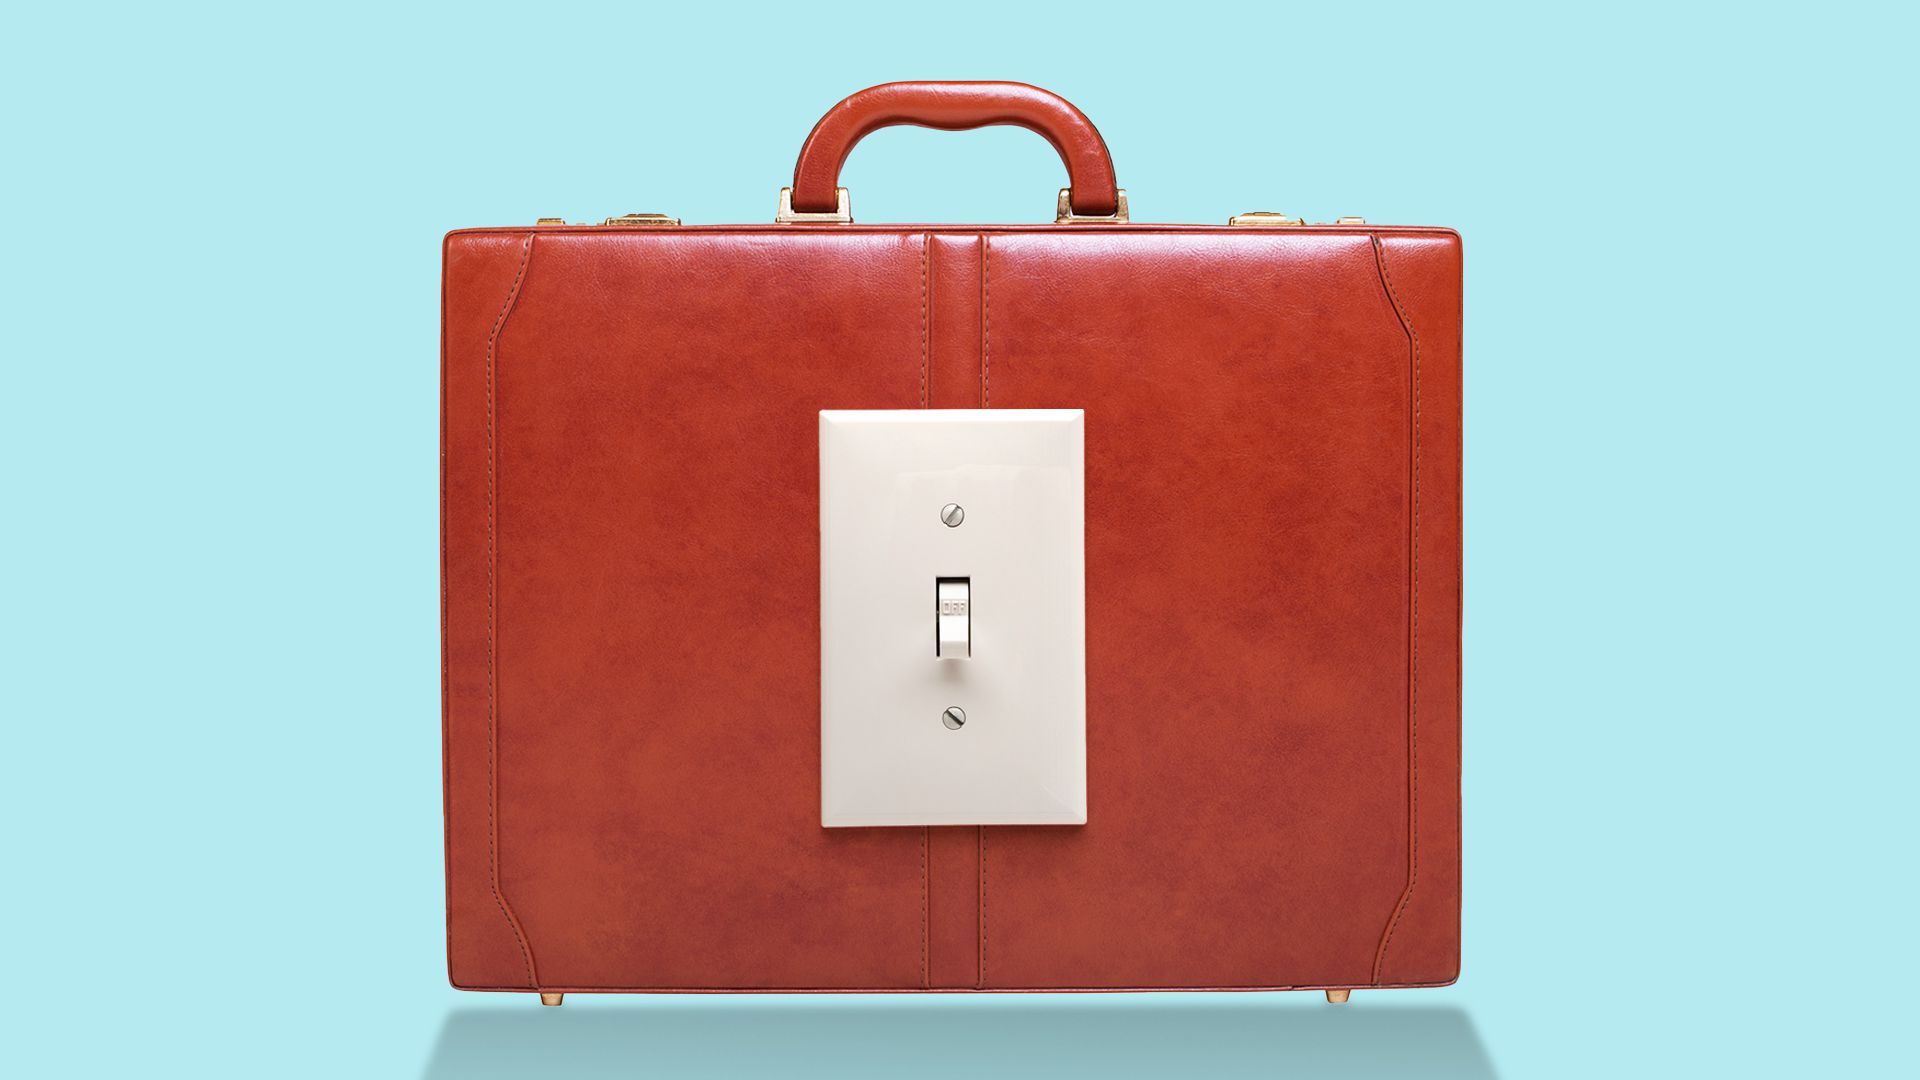 Illustration of a briefcase with an on off switch